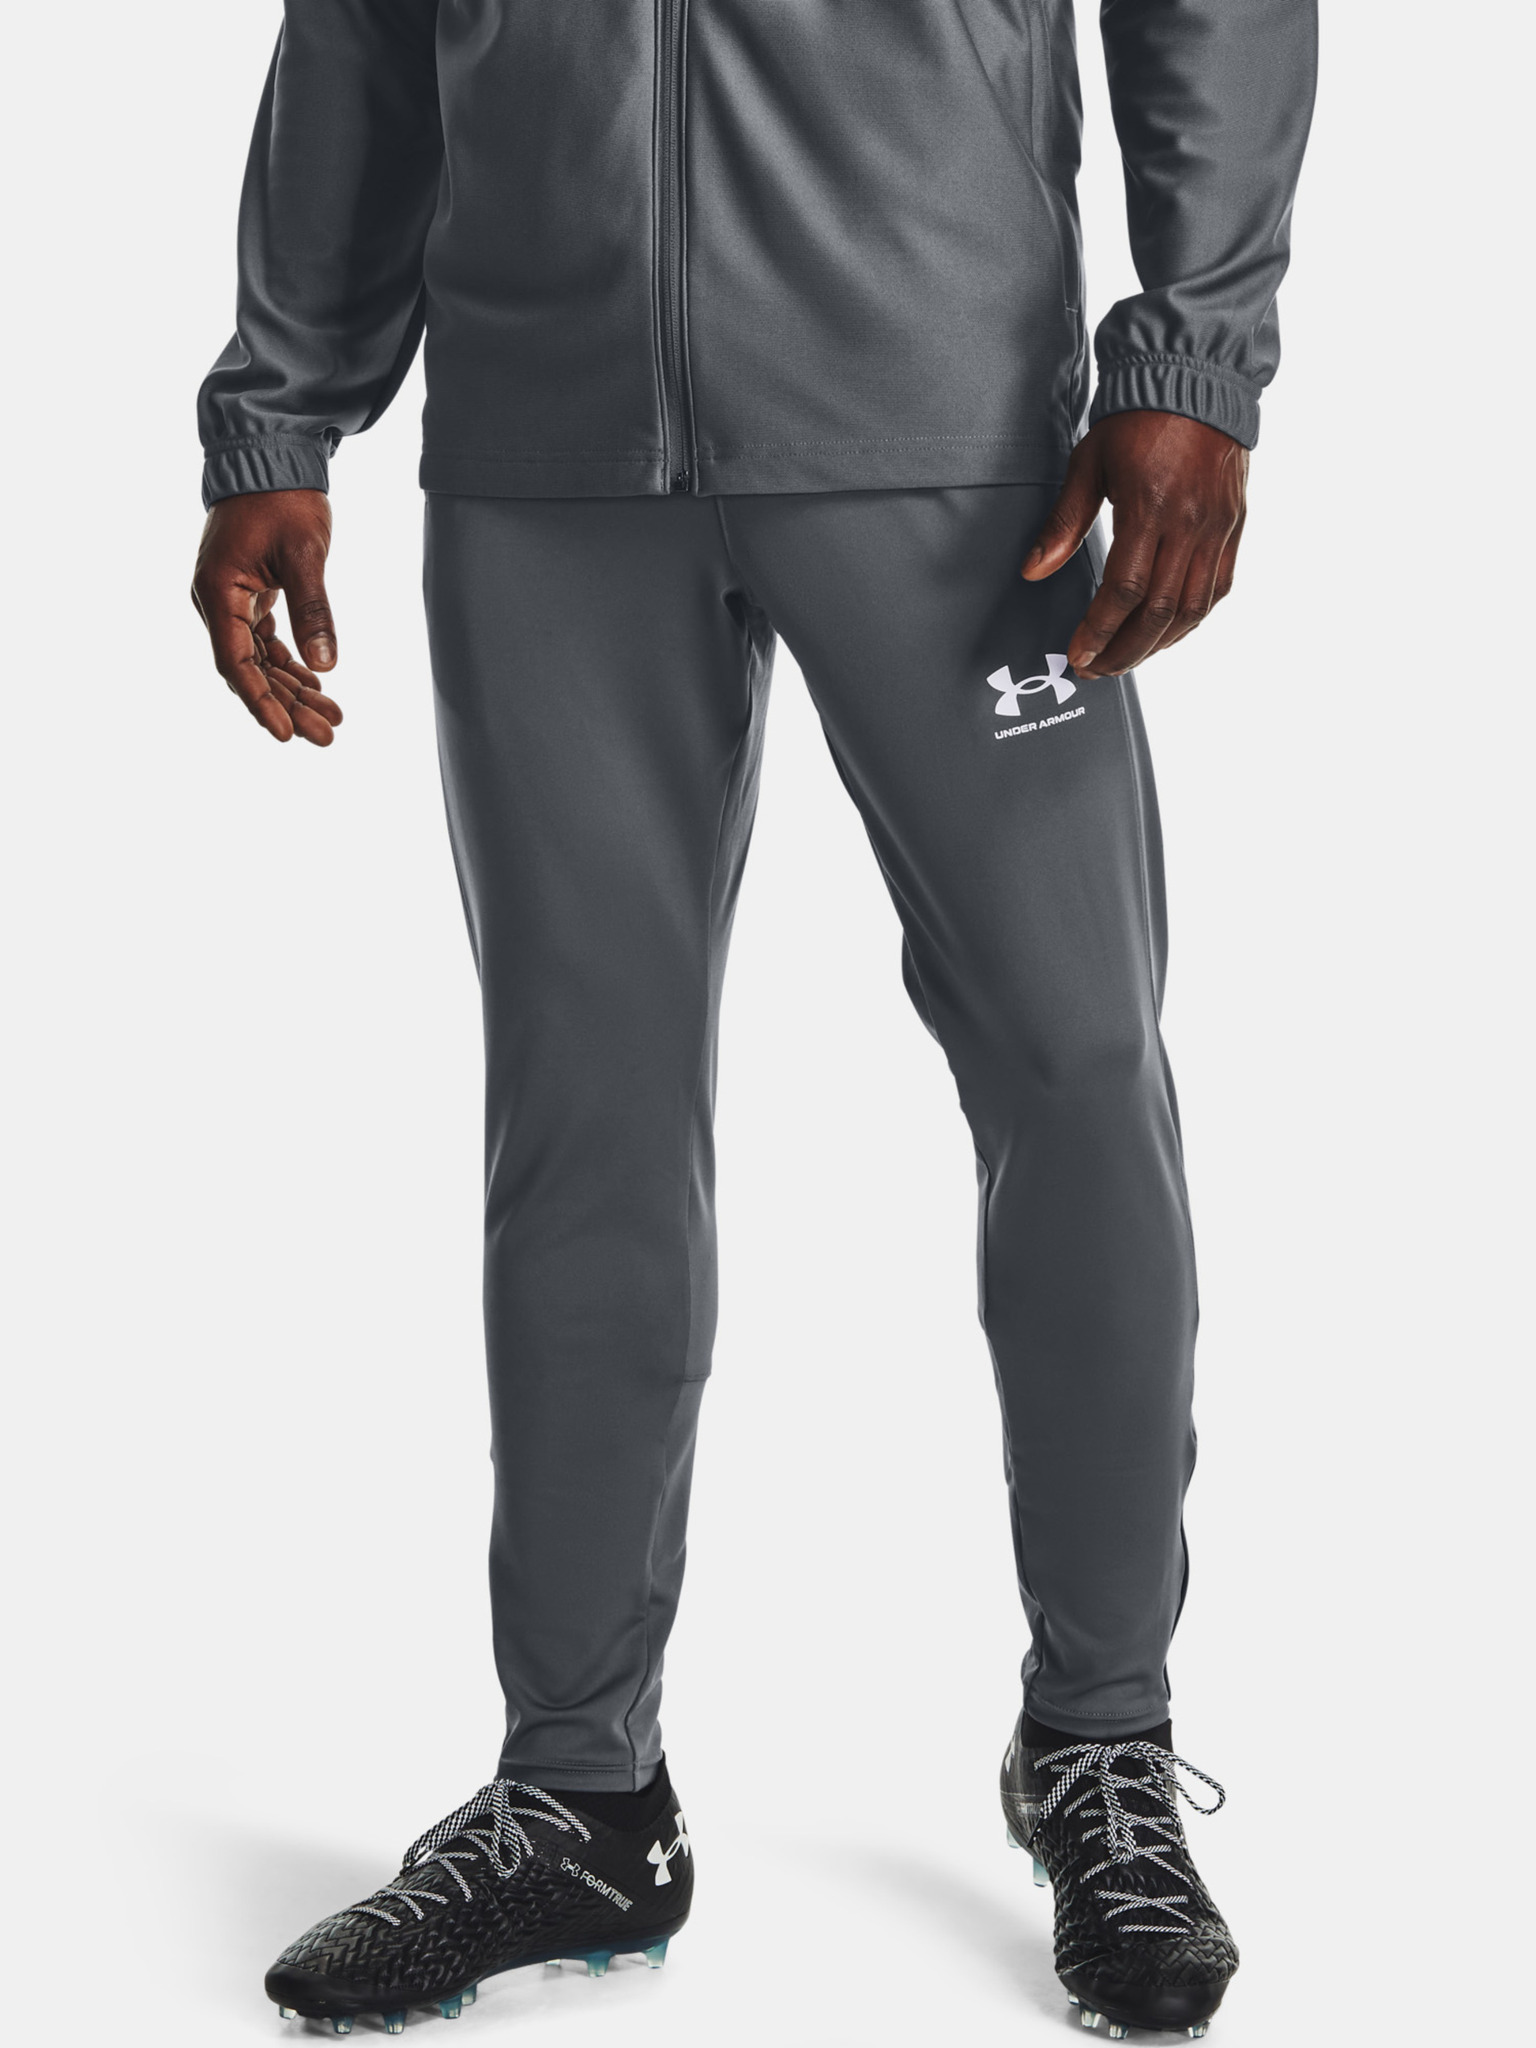 UNDER ARMOUR - Men's OutRun The Storm Trousers Black/Reflective